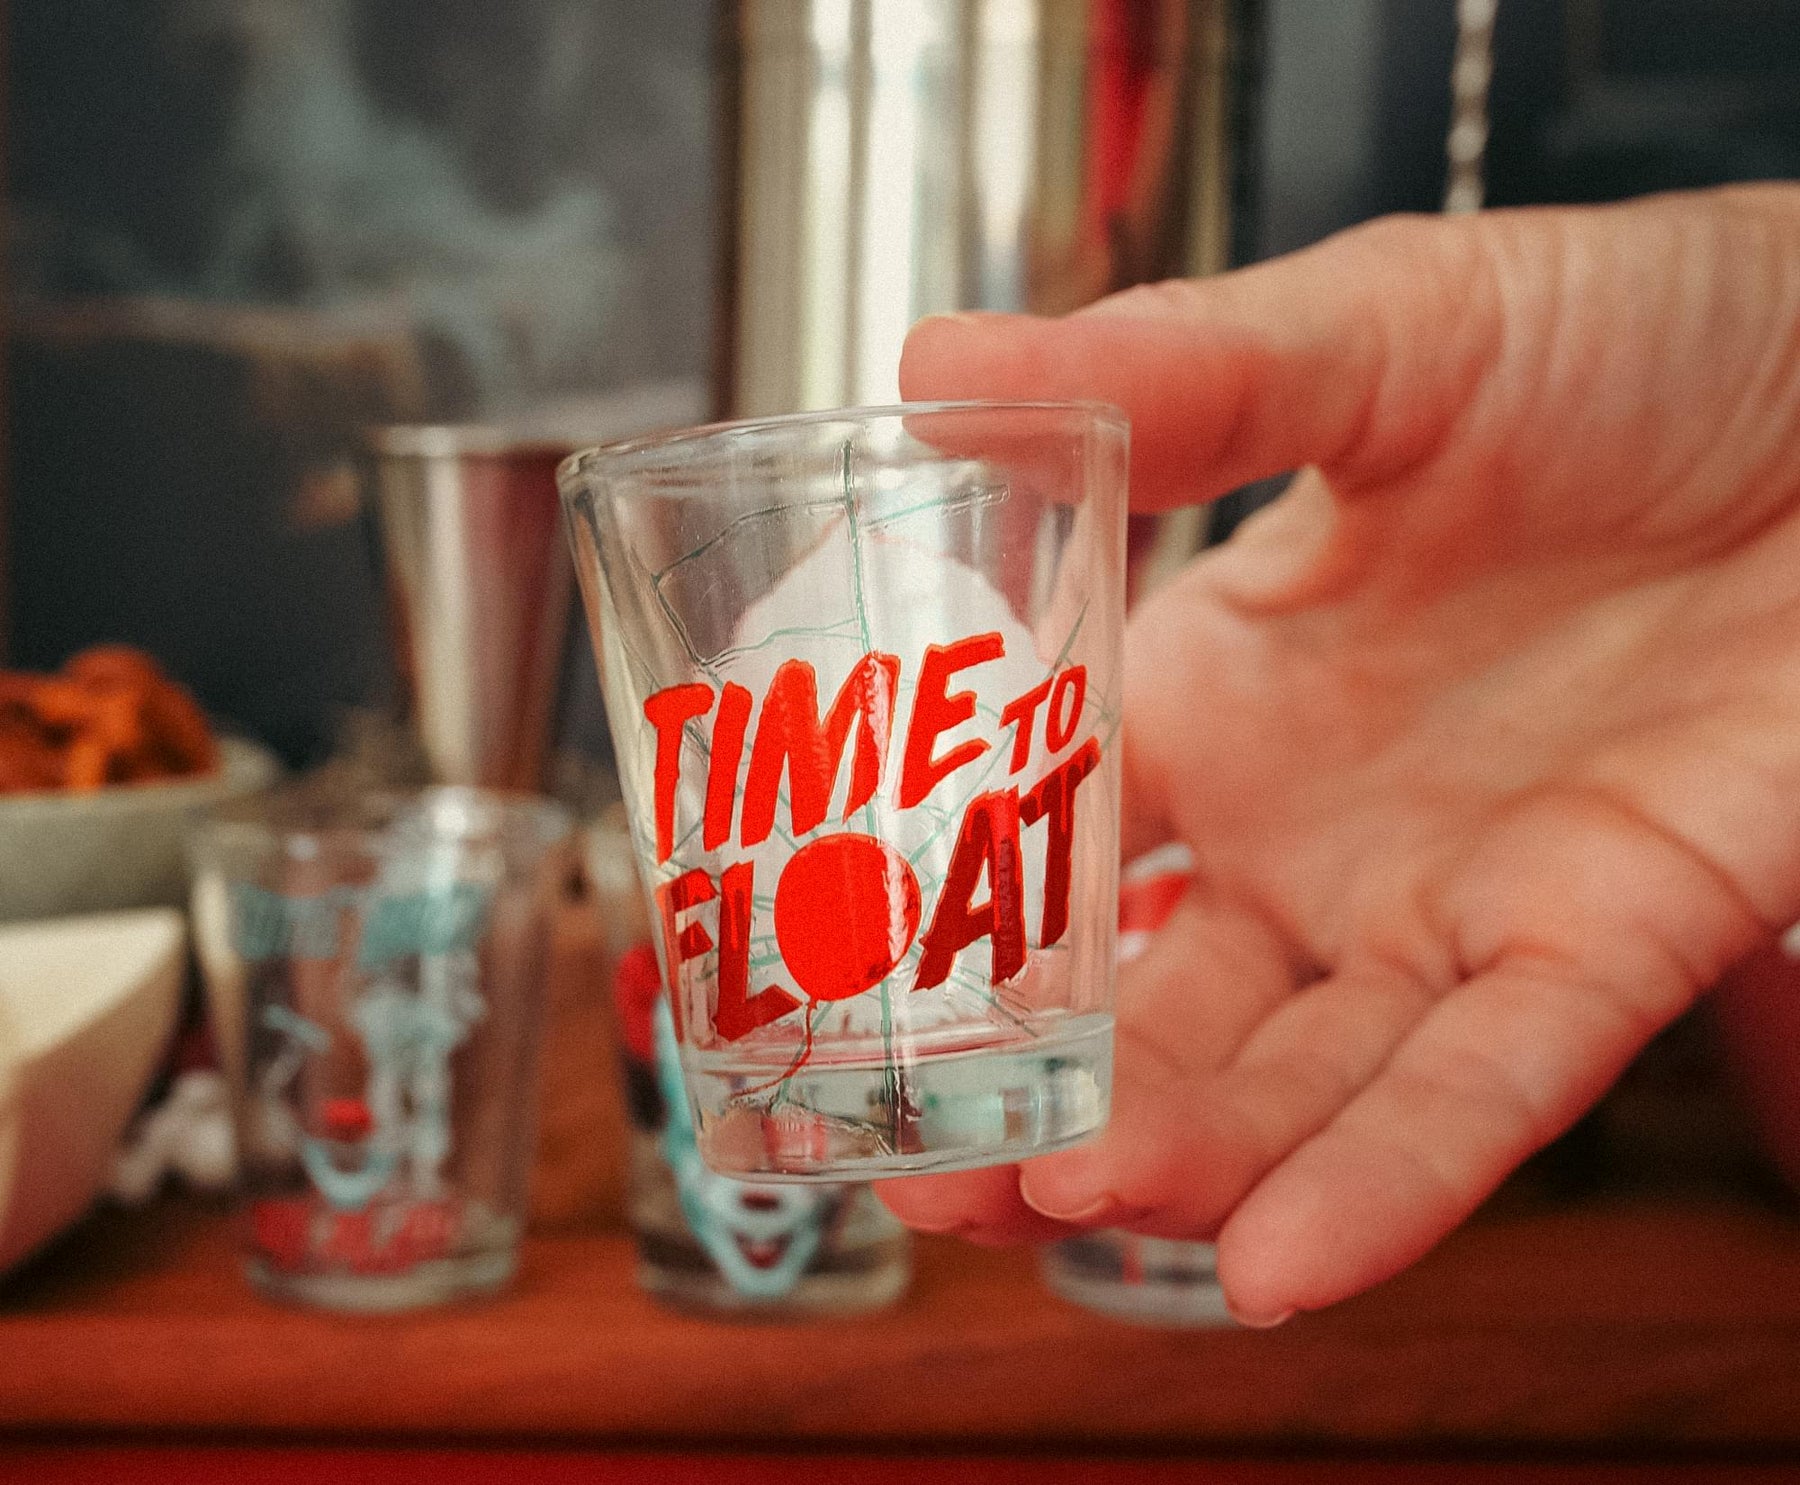 IT Pennywise 2-Ounce Mini Shot Glasses | Set of 4